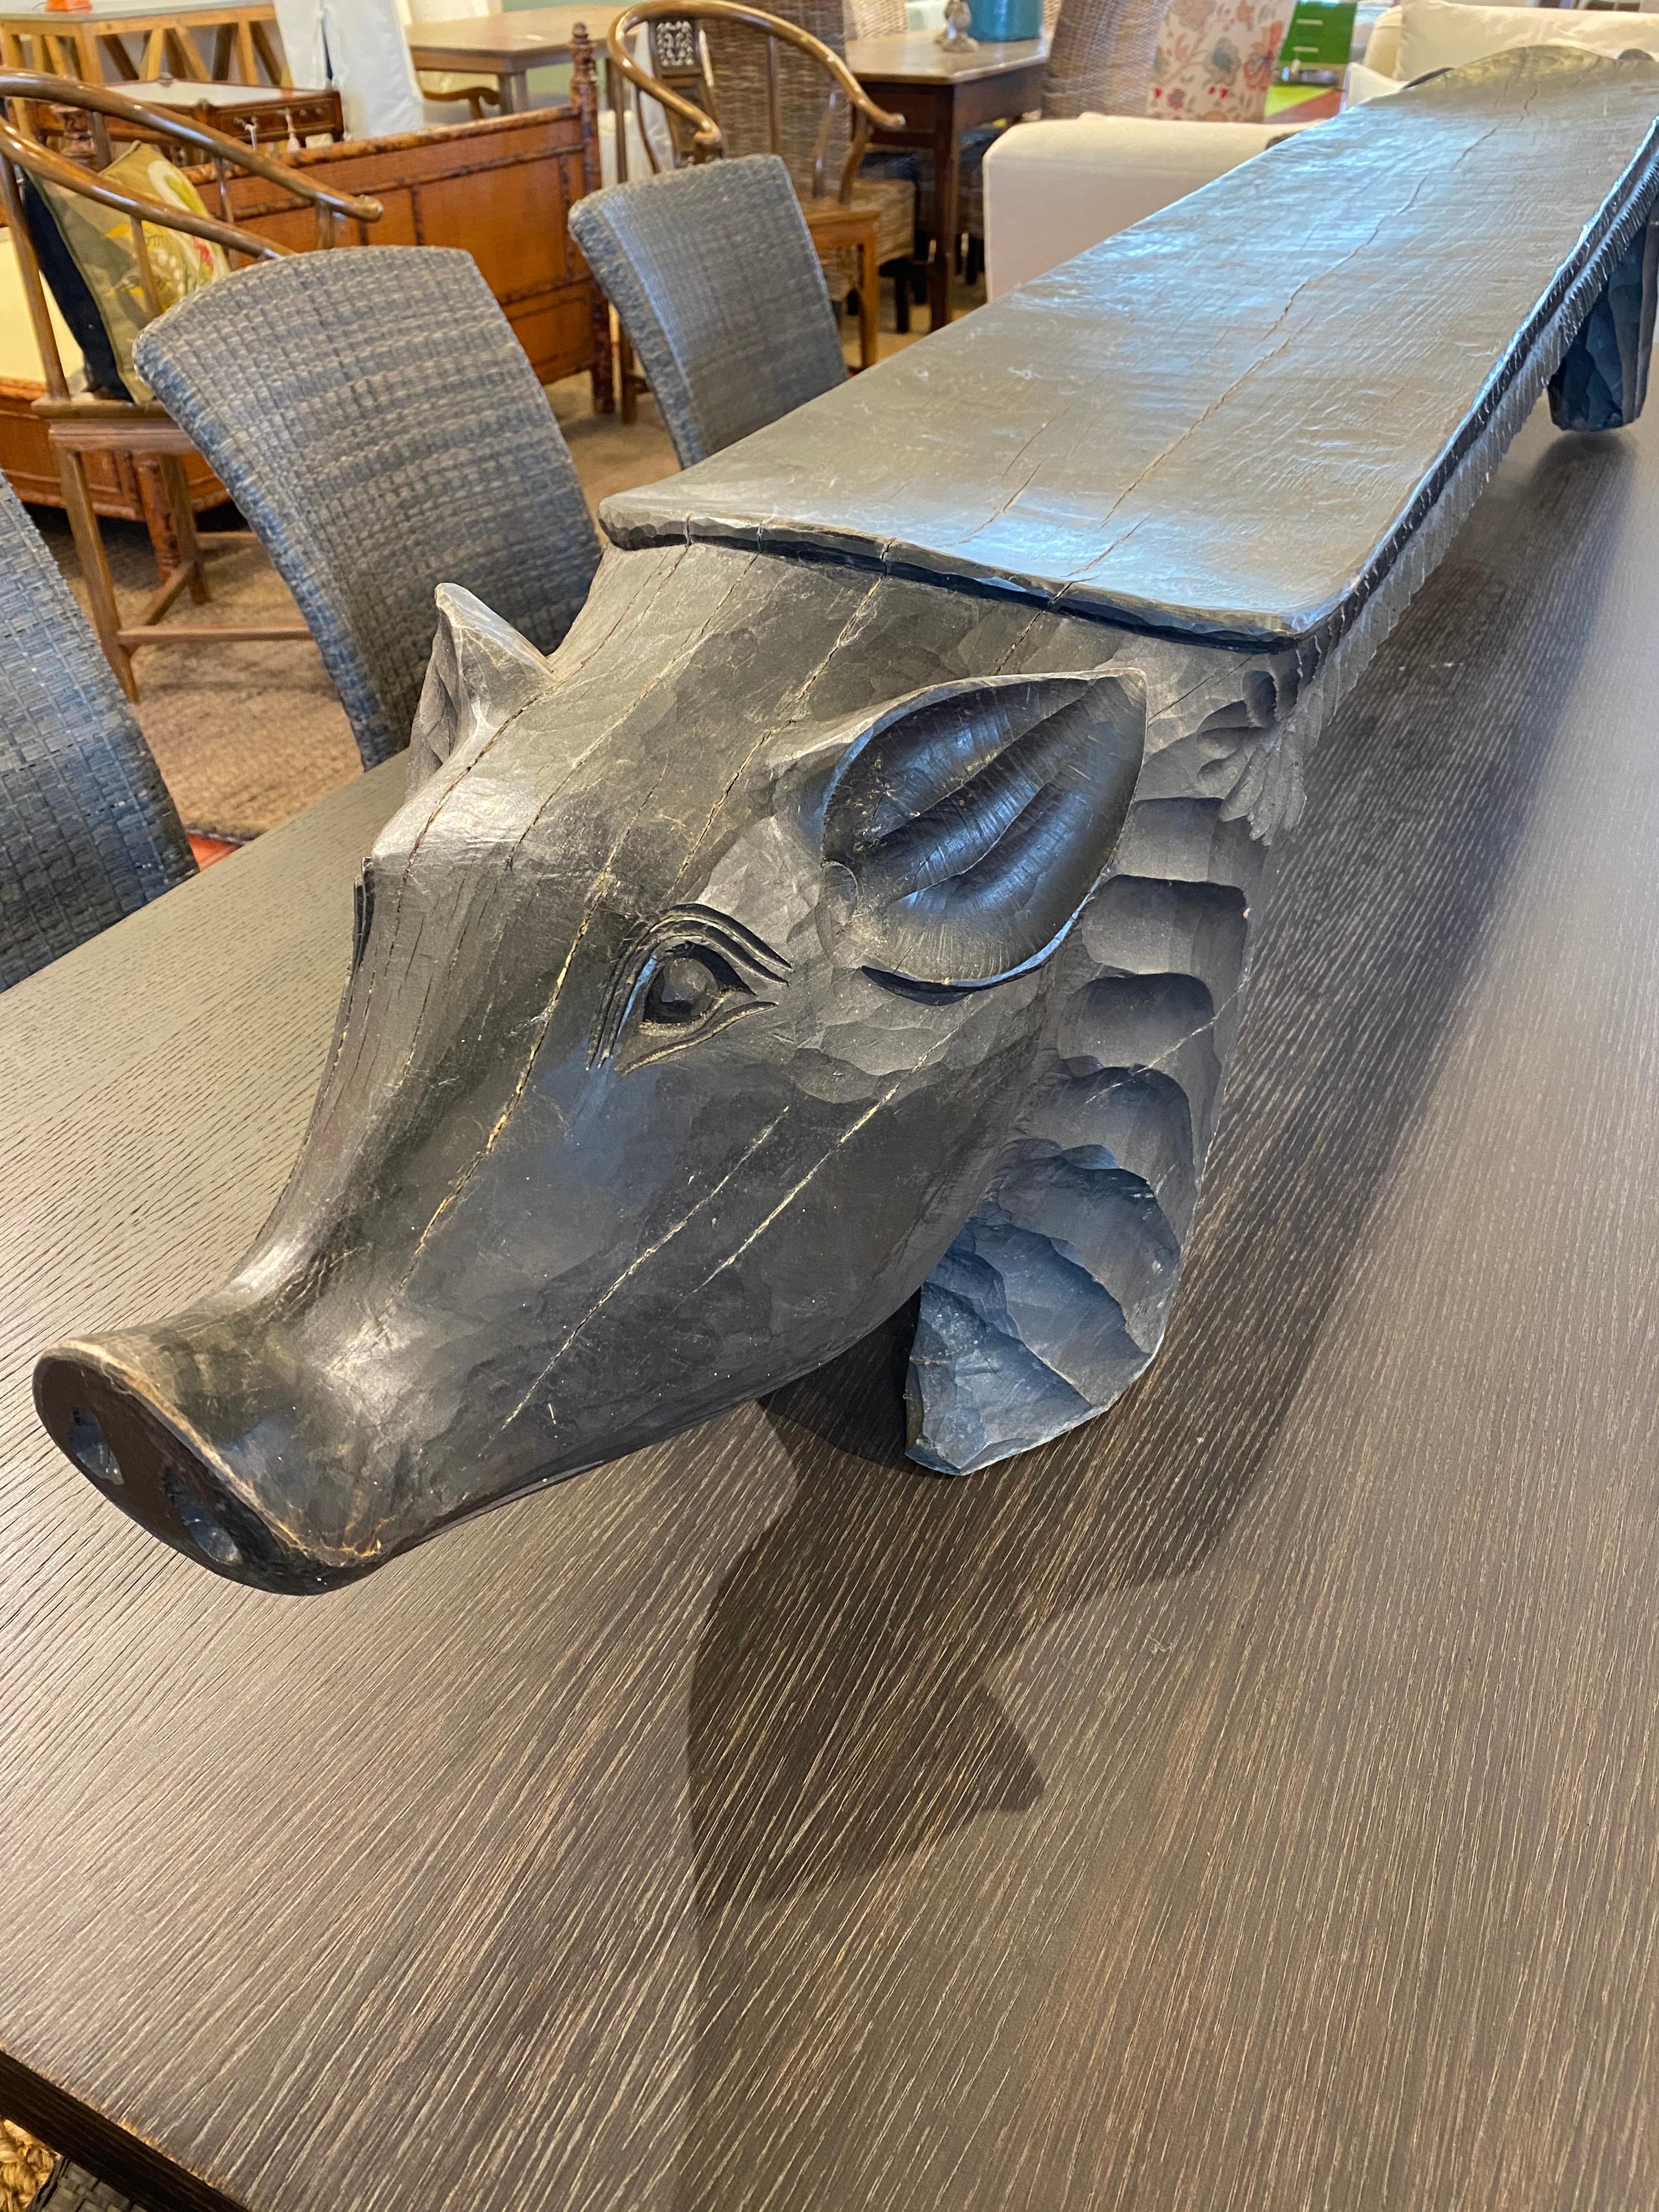 Black carved bench with pig heads

Measures: 90